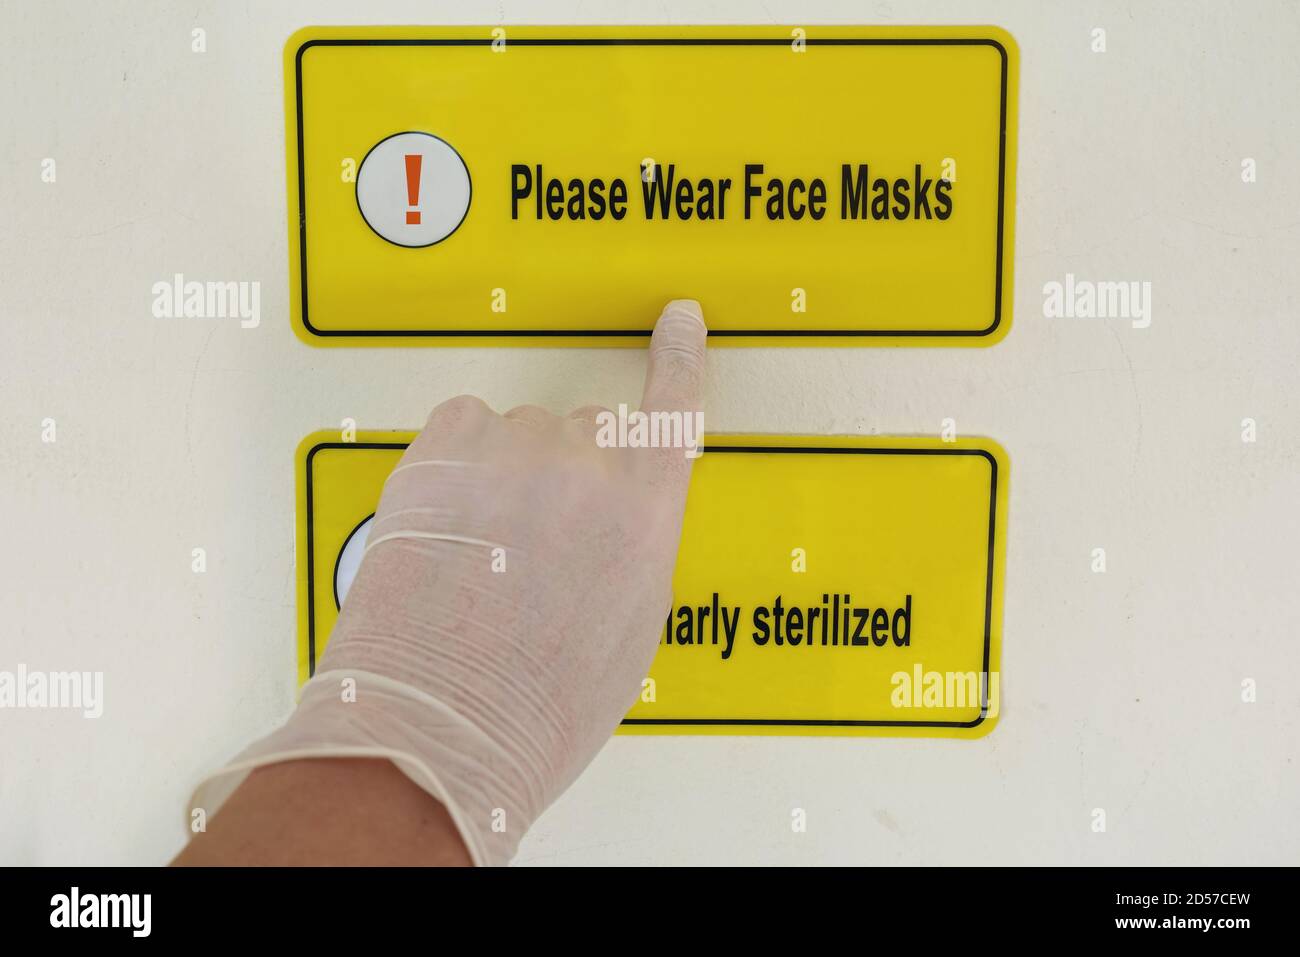 Hand in plastic glove pointing to sign urging to wear face mask. Stock Photo